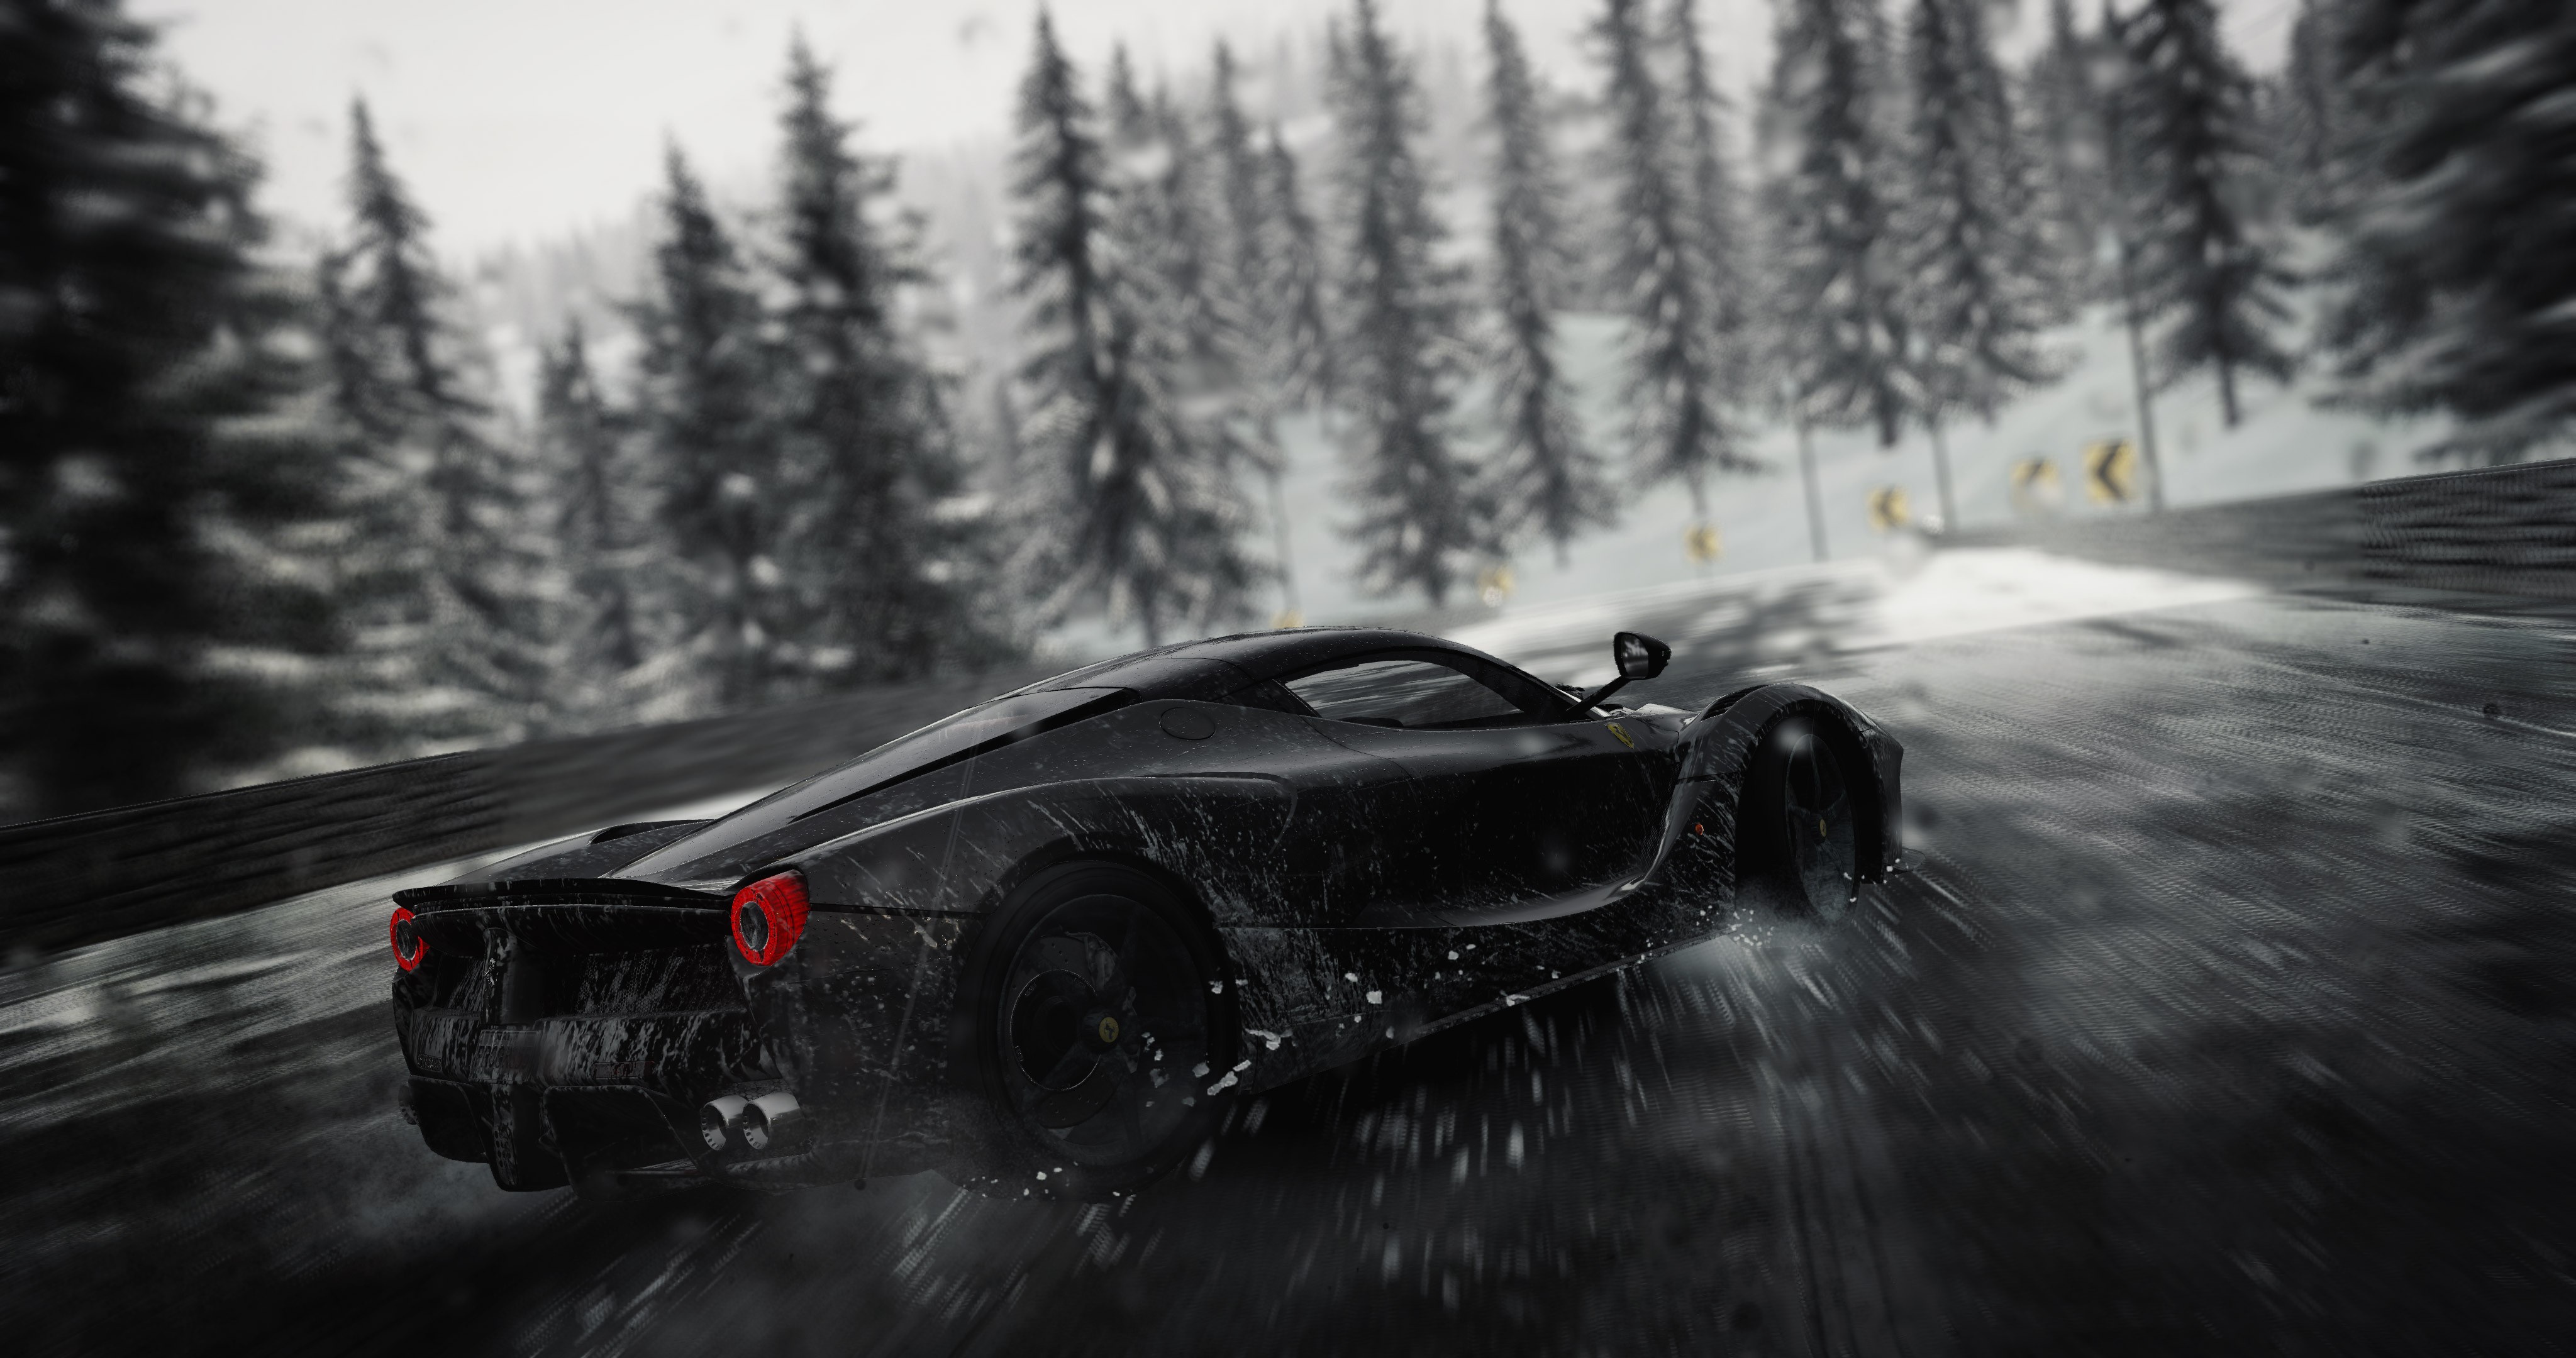 Video Game The Crew HD Wallpaper | Background Image